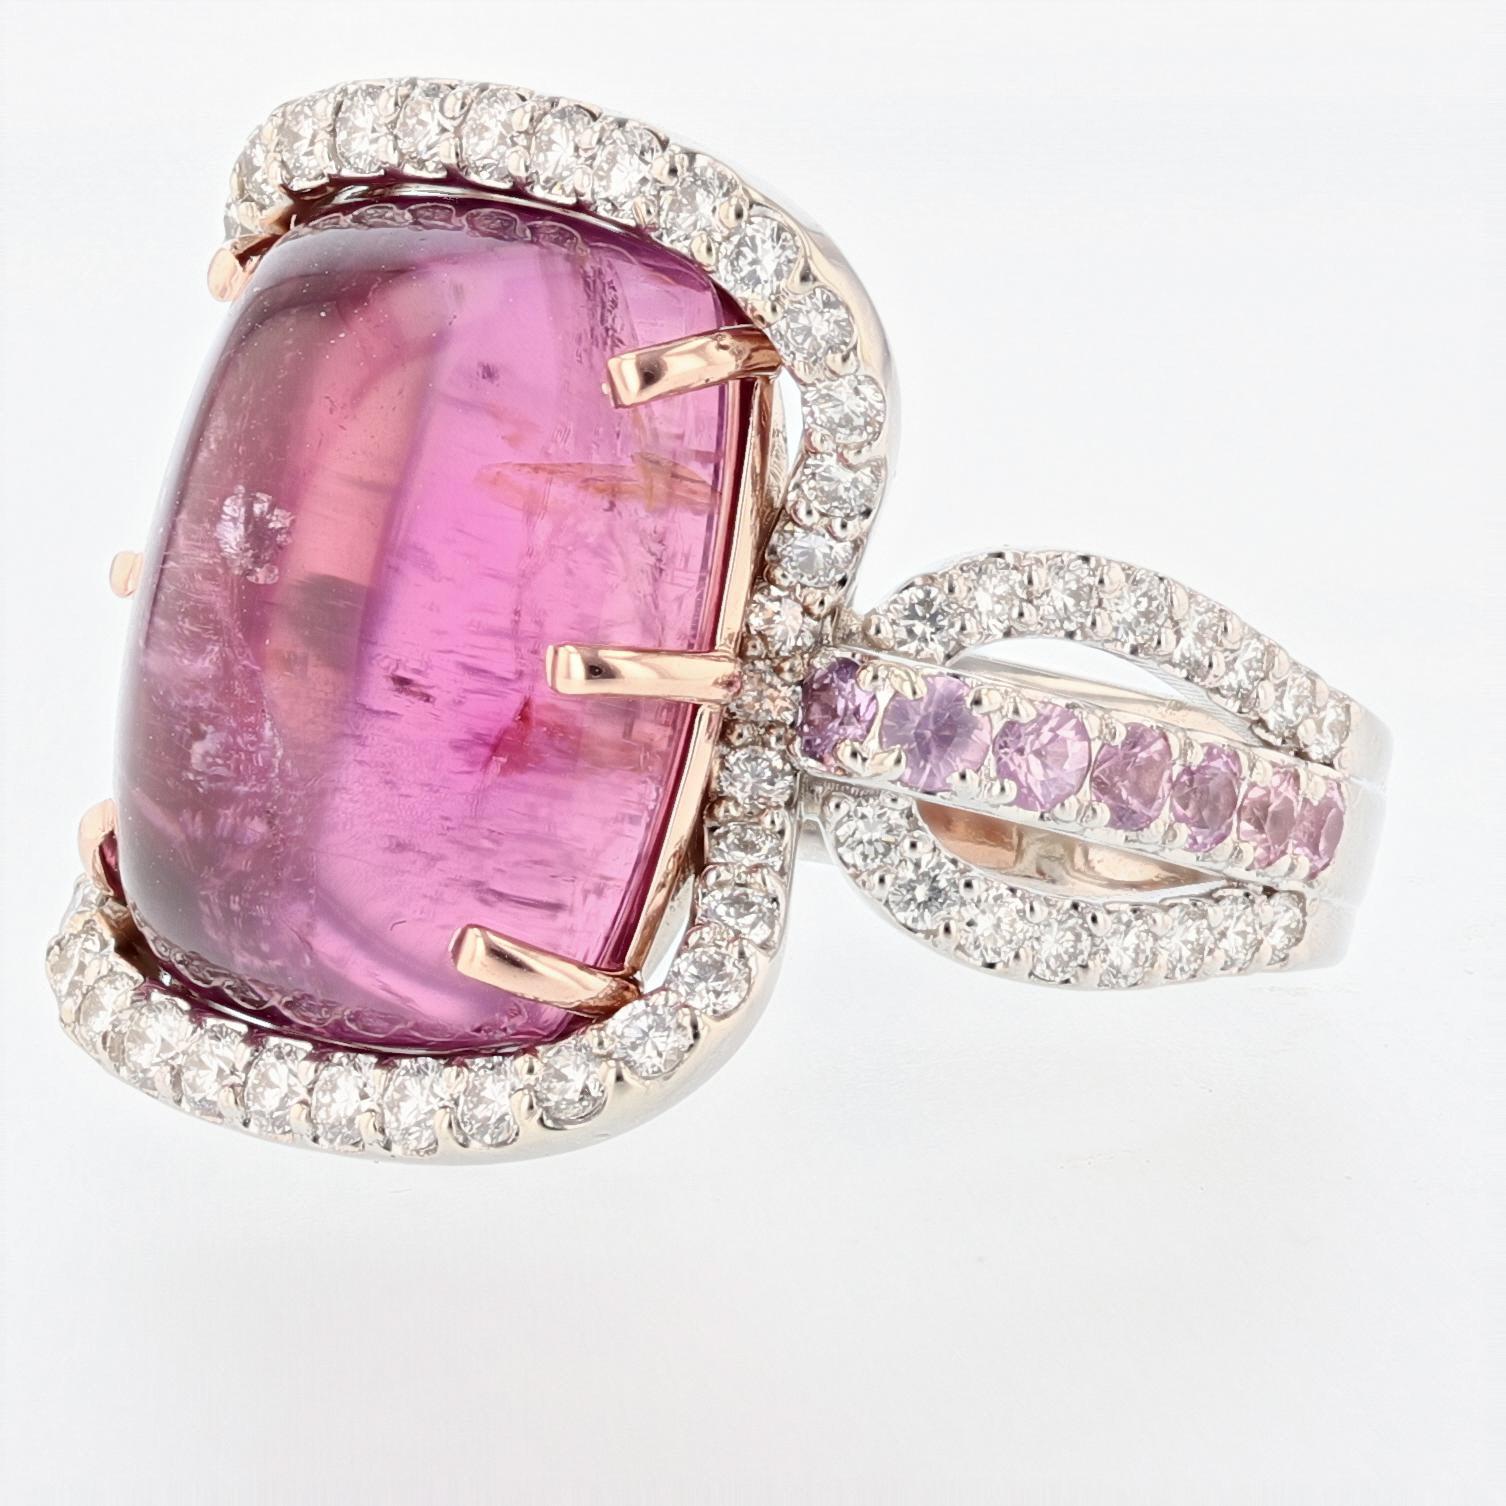 This ring is made in 14K White and Rose gold featuring 1 cabochon Pink Tourmaline weighing 13.90 ct that is prong set. There are 14 round cut pink sapphires weighing 0.71 ct, pave set and 74 round cut pave set diamonds weighing 1.12 ct with a color